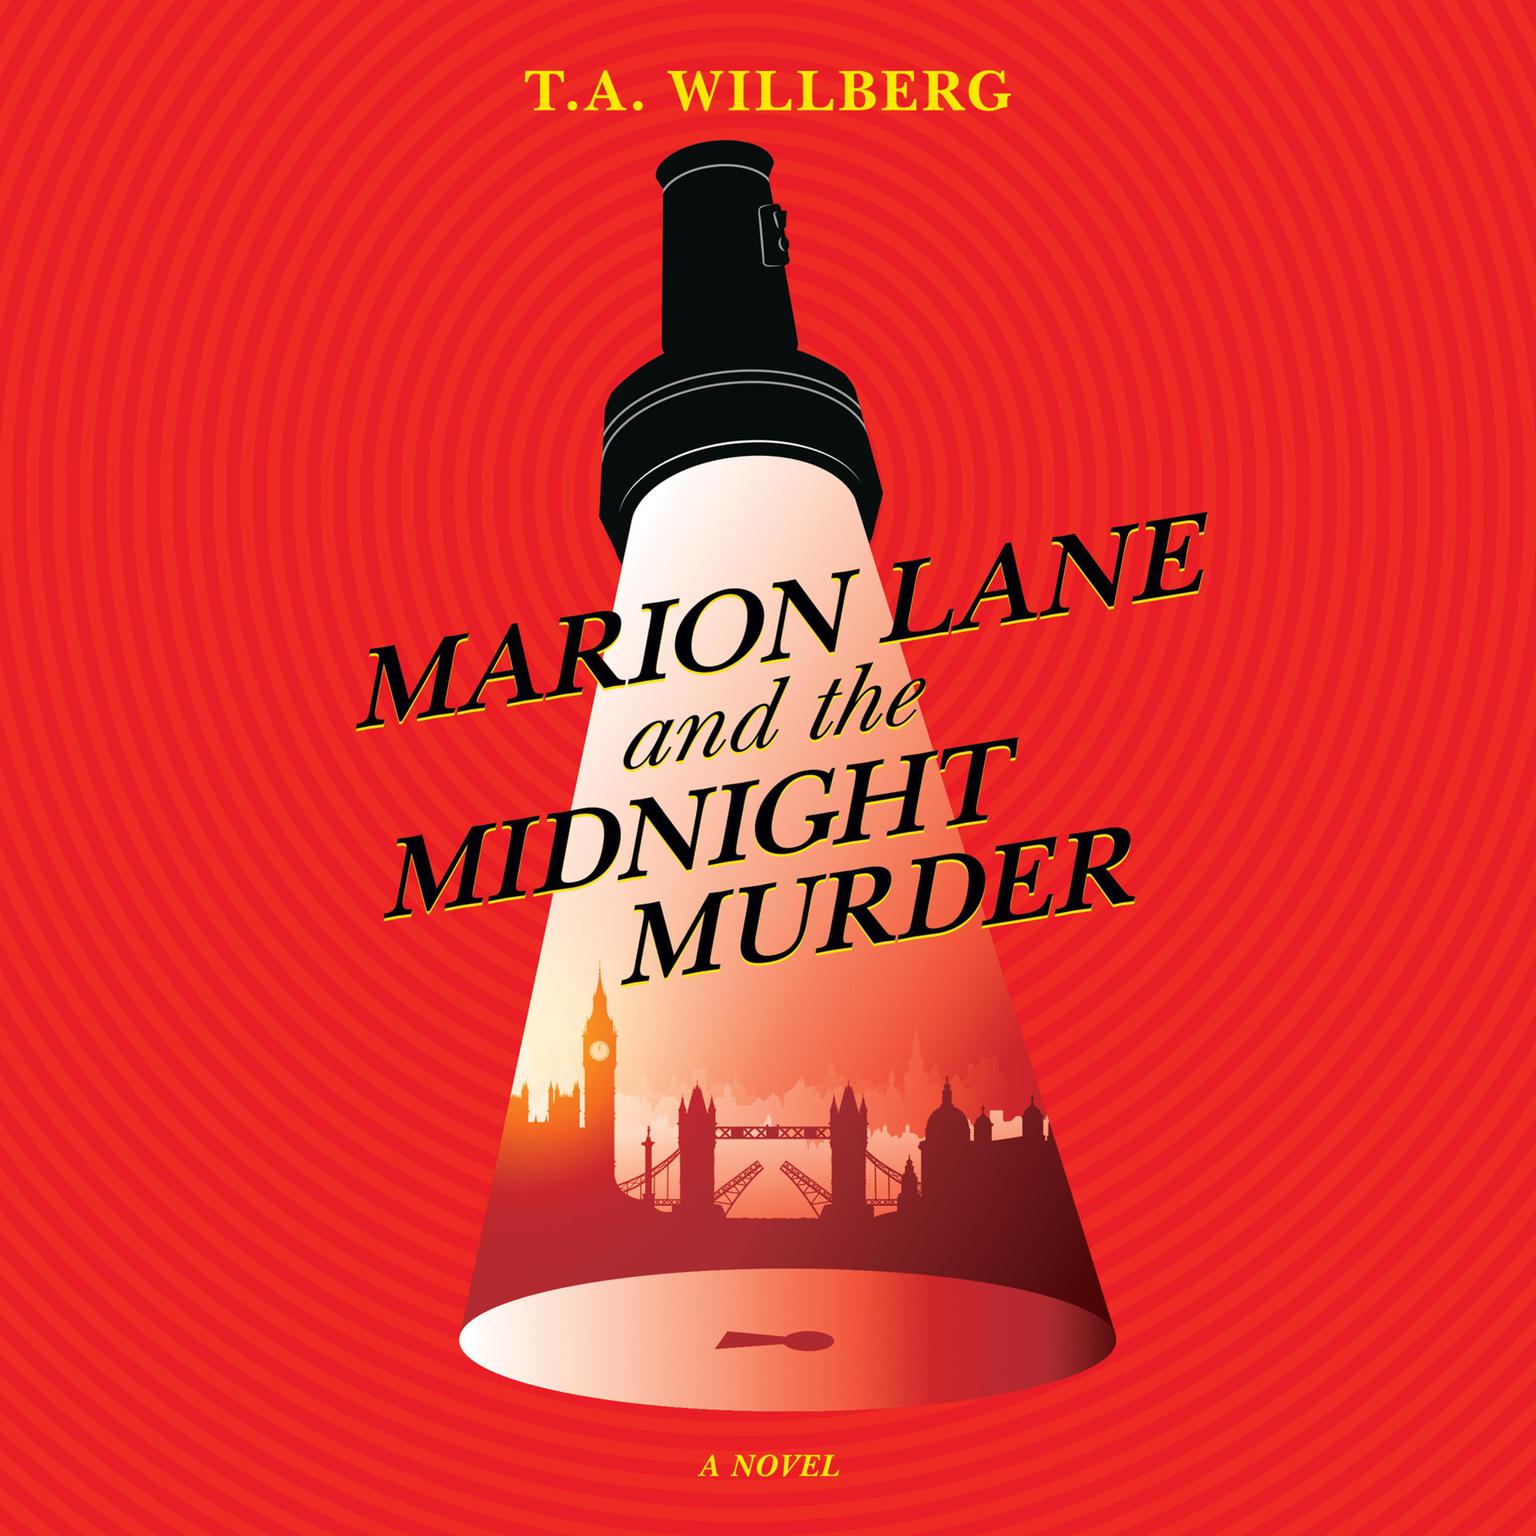 Marion Lane and the Midnight Murder: A Novel Audiobook, by T. A. Willberg